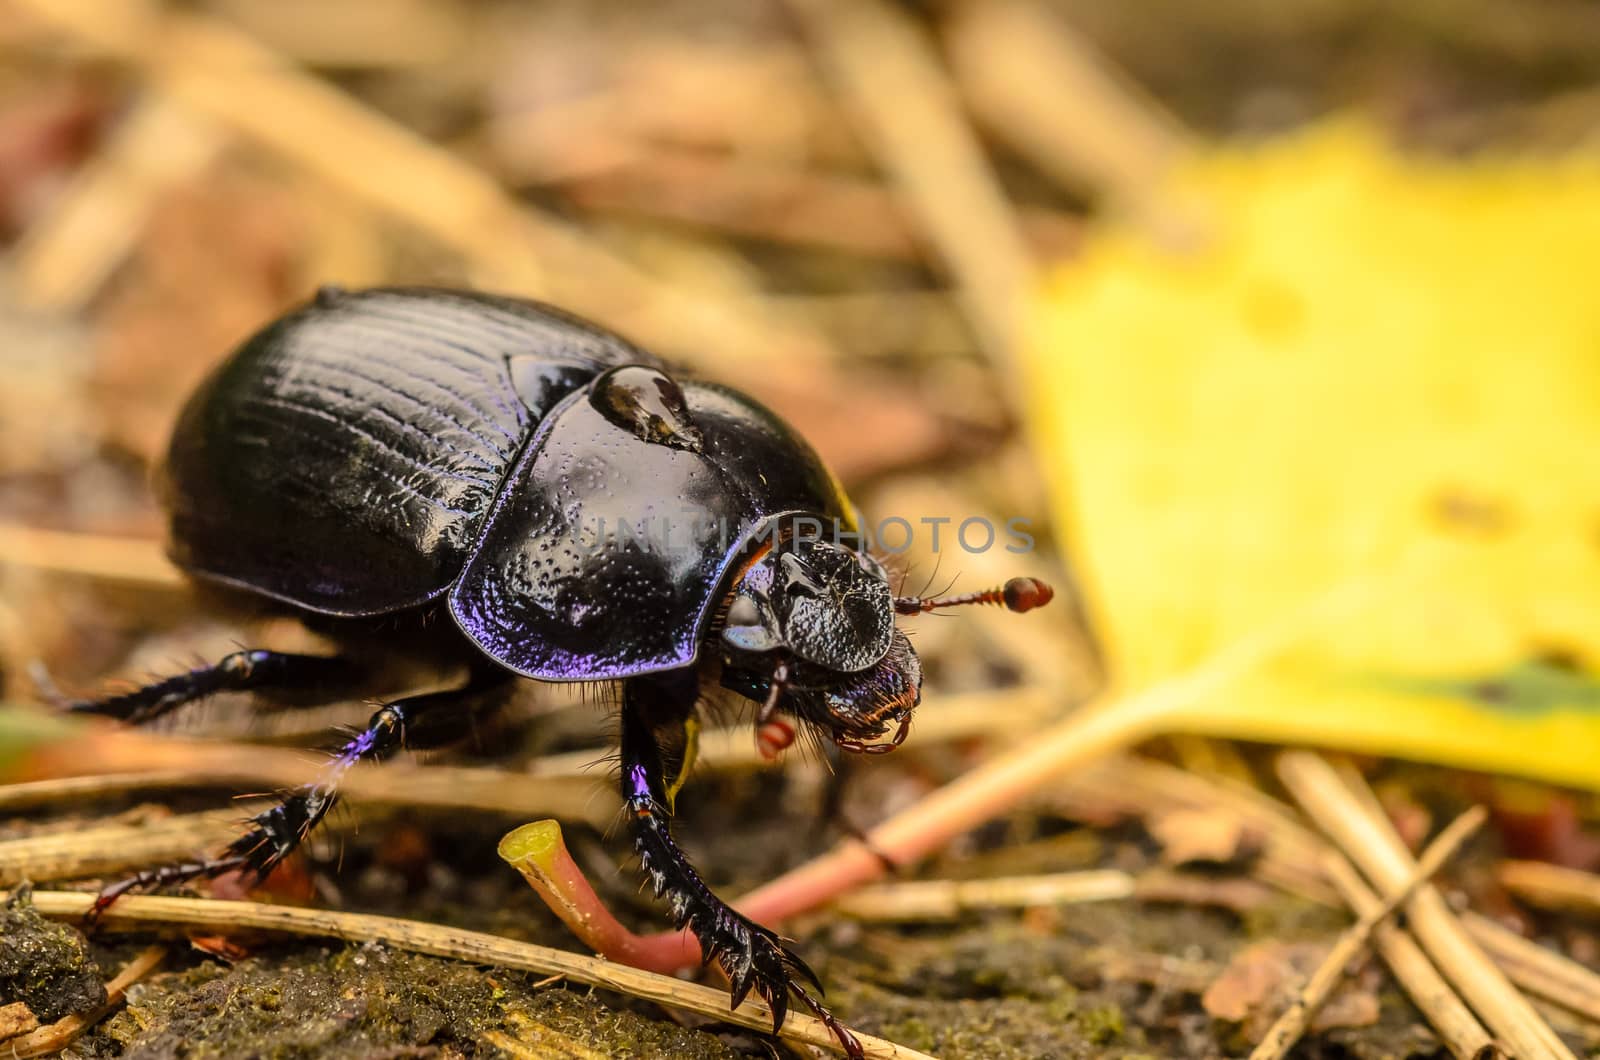 Walking between al the fallen twigs in the forest. This beautiful macro shot of a forest beetle really shows the nice black and purple contrast!